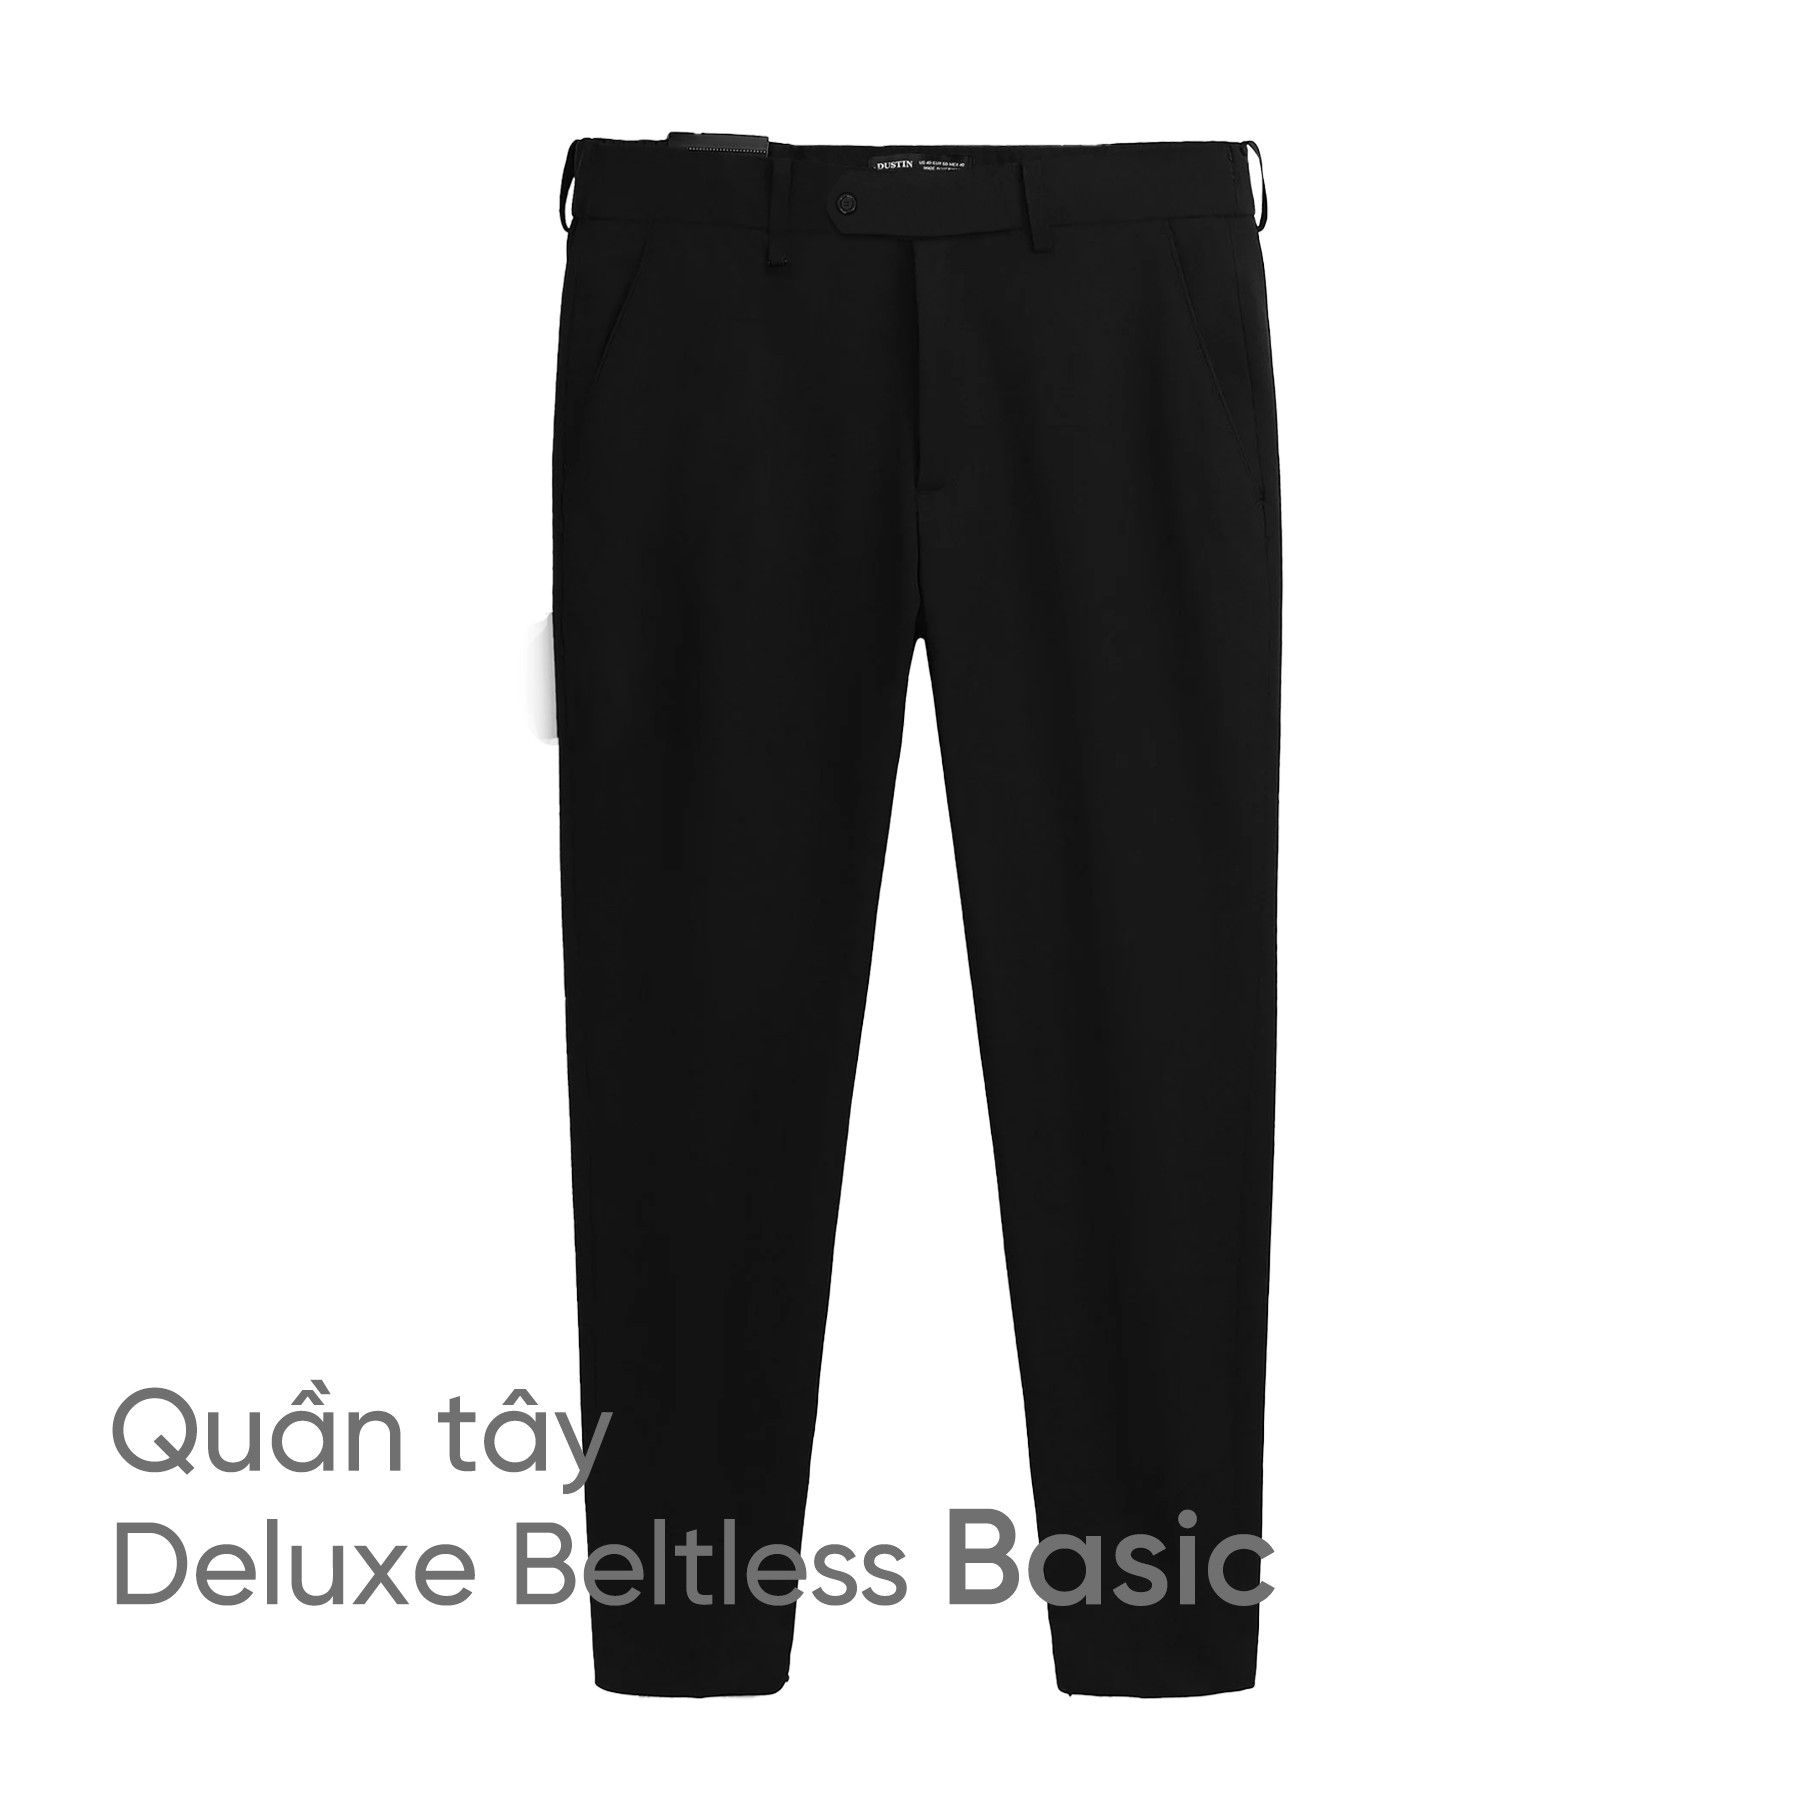 [size 30-34] Quần Tây Beltless Basic Deluxe